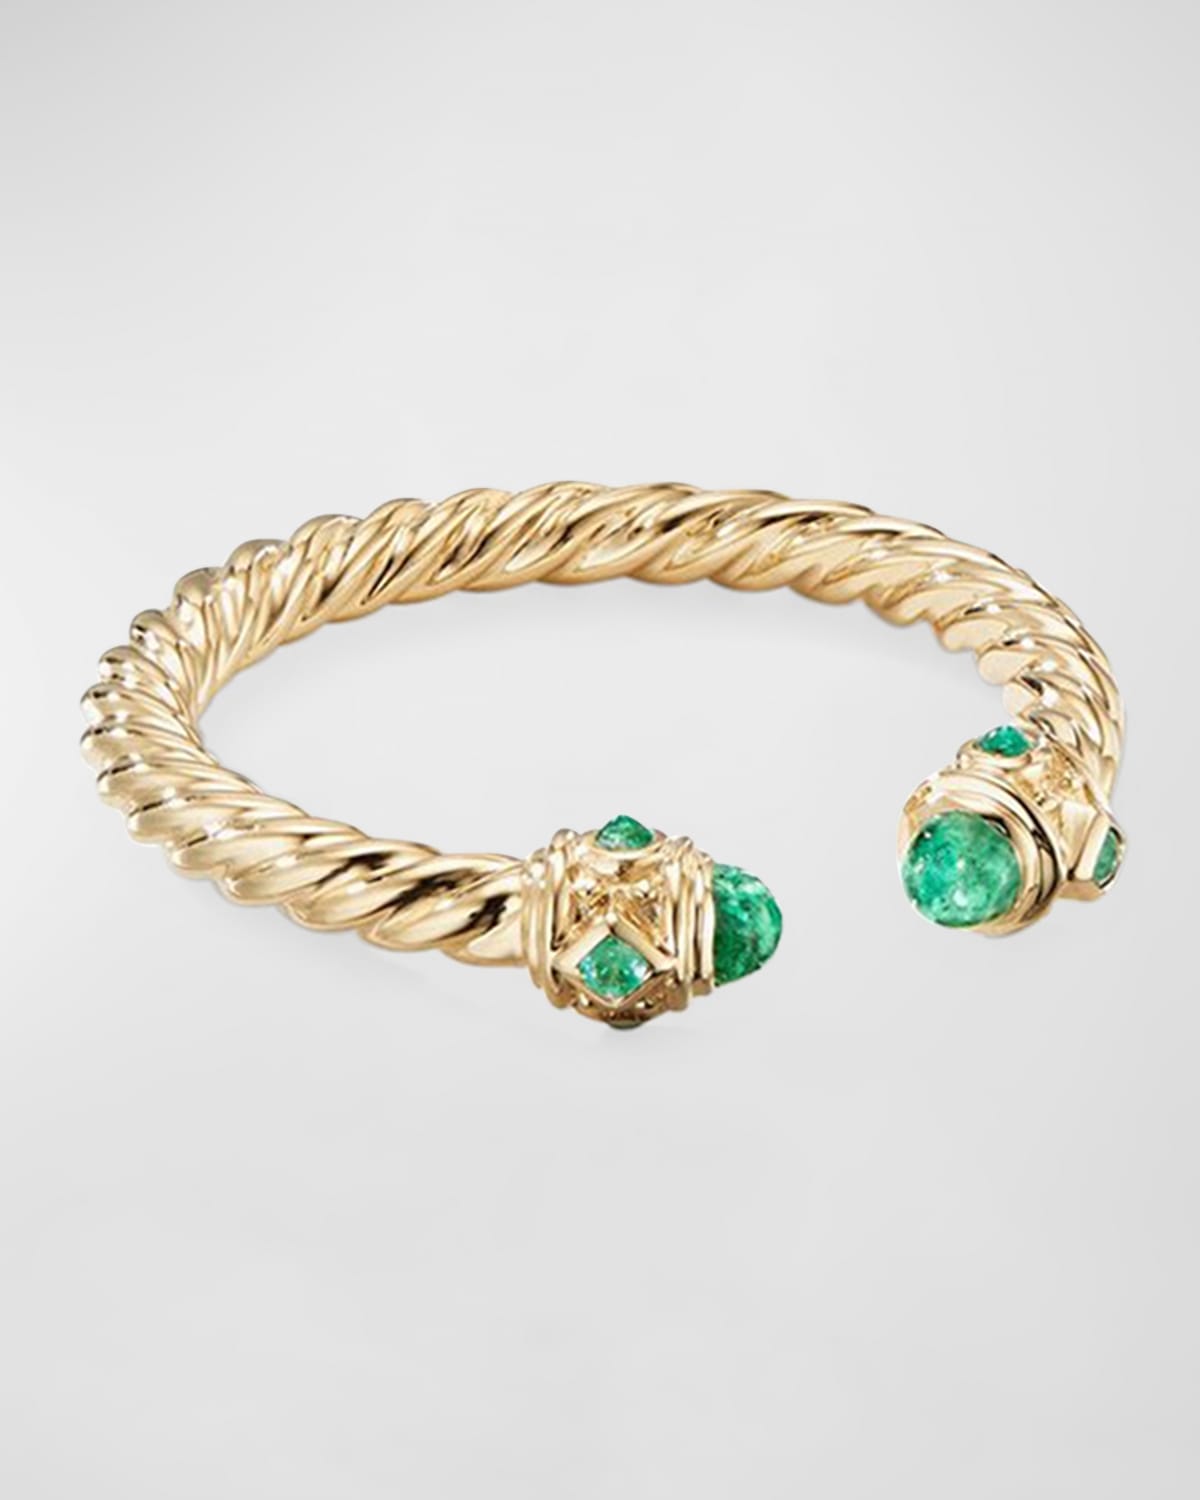 David Yurman 18k Gold Renaissance Ring With Turquoise In Emerald